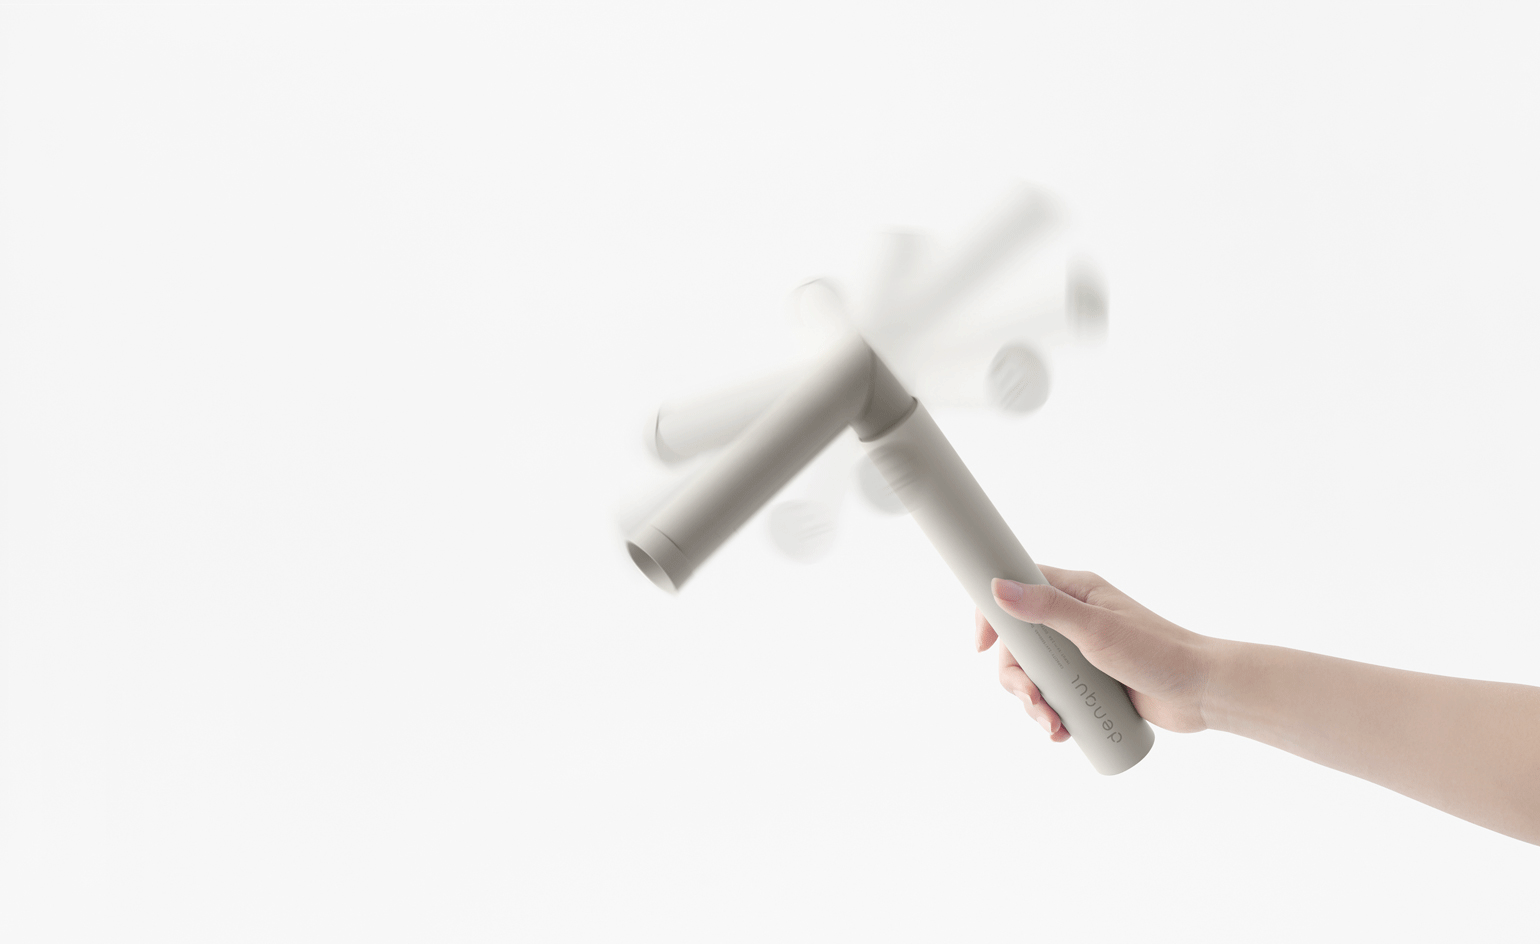 Denqul emergency phone charger, by Nendo for Sugita Ace, 2018